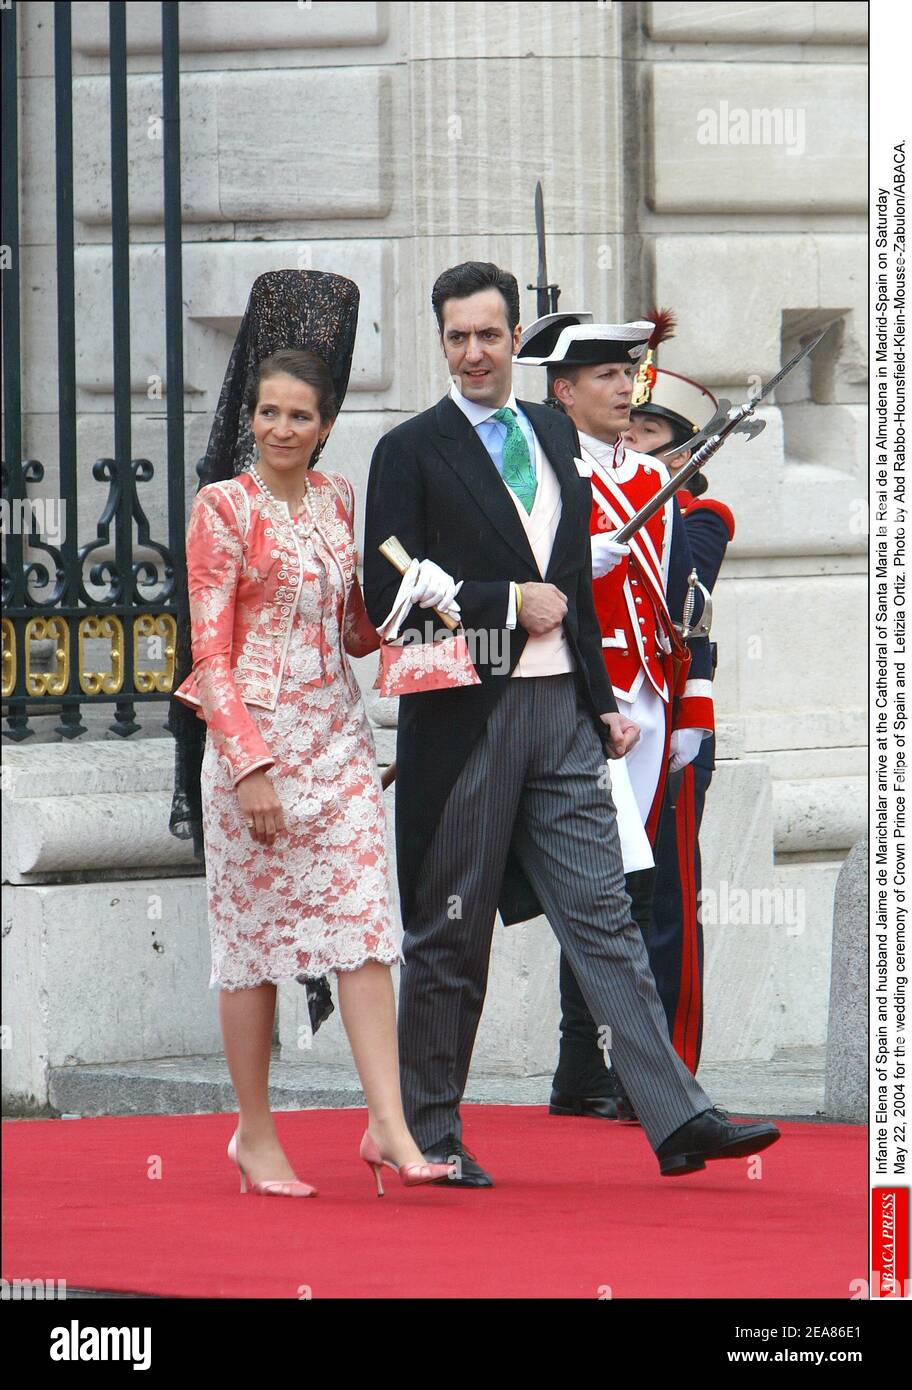 Infante Elena of Spain and husband Jaime de Marichalar arrive at the Cathedral of Santa Maria la Real de la Almudena in Madrid-Spain on Saturday May 22, 2004 for the wedding ceremony of Crown Prince Felipe of Spain and Letizia Ortiz. Photo by Abd Rabbo-Hounsfield-Klein-Mousse-Zabulon/ABACA. Stock Photo